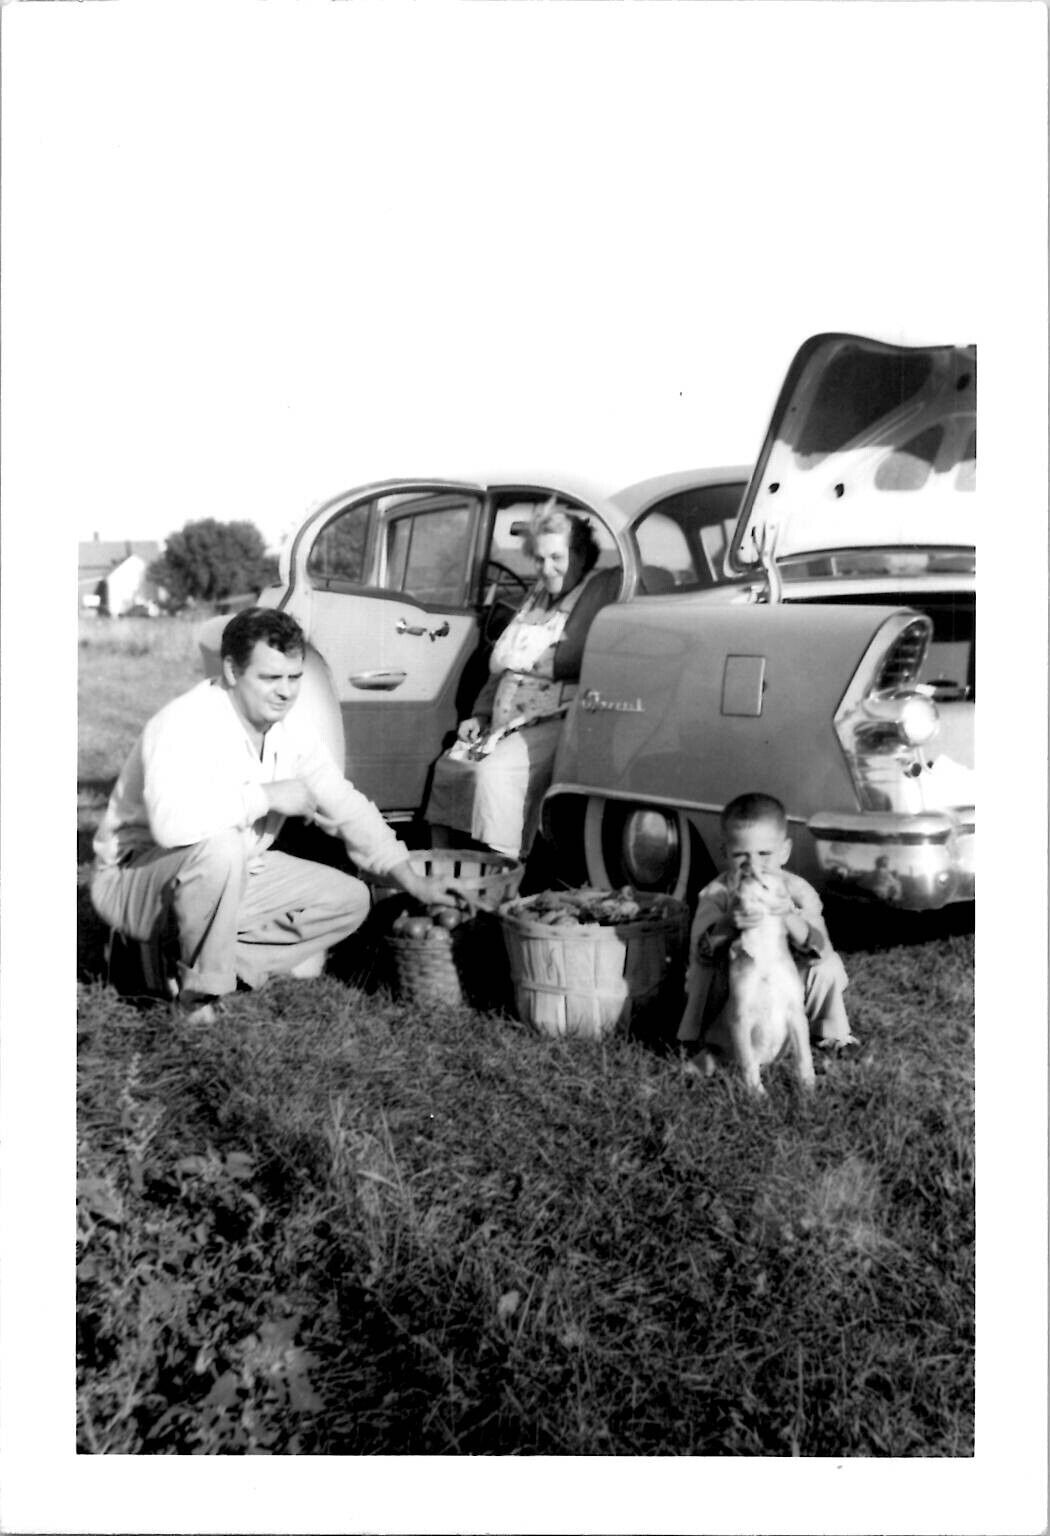 Family Trunk of Car Harvesting Tomatoes Rural Americana 1950s Vintage Photograph